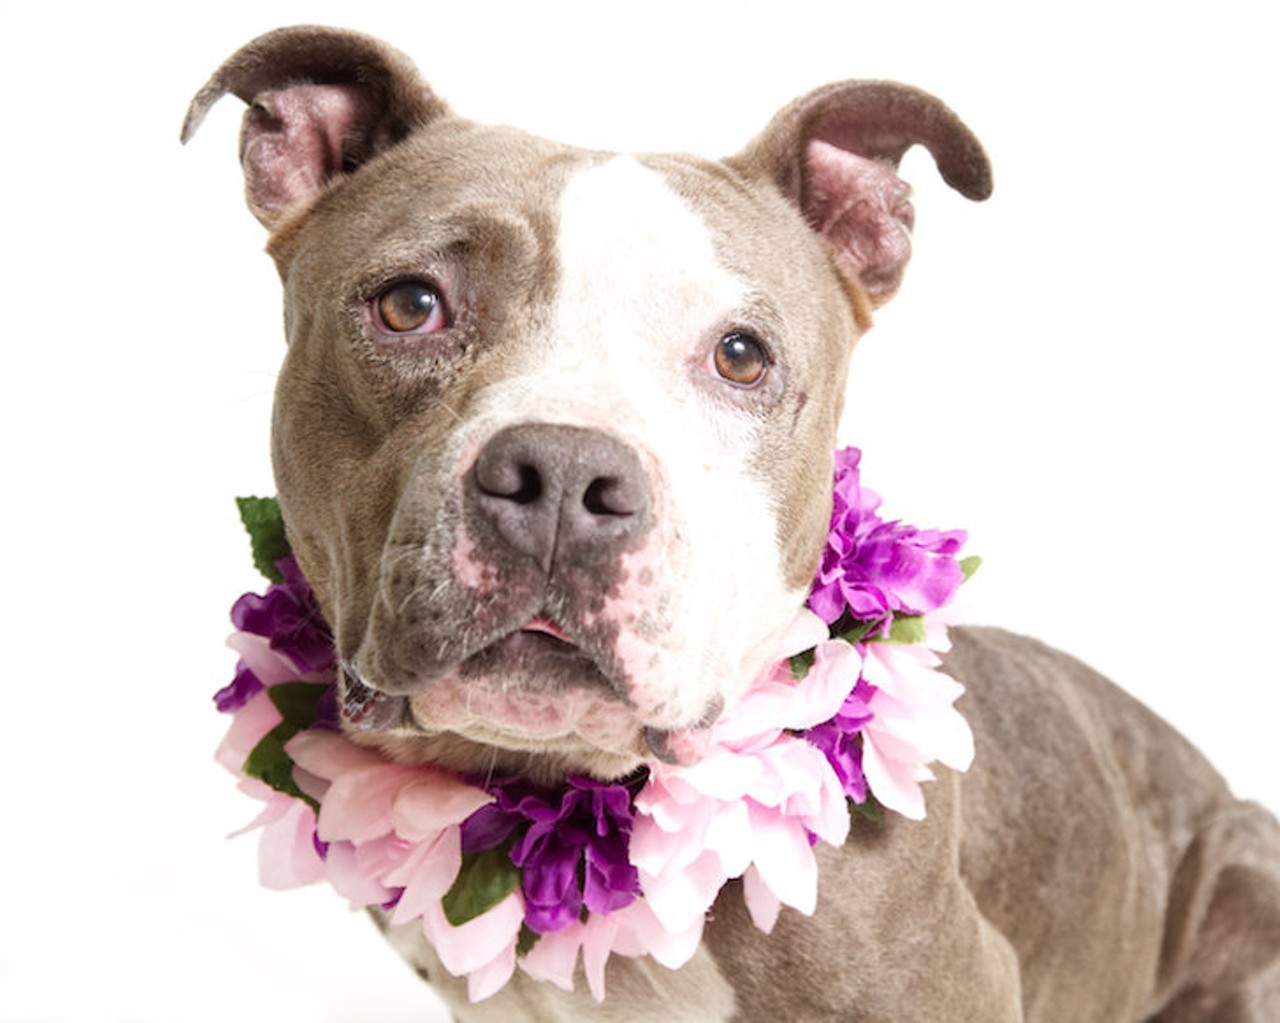 25 adoptable dogs waiting to meet you at Orange County Animal Services